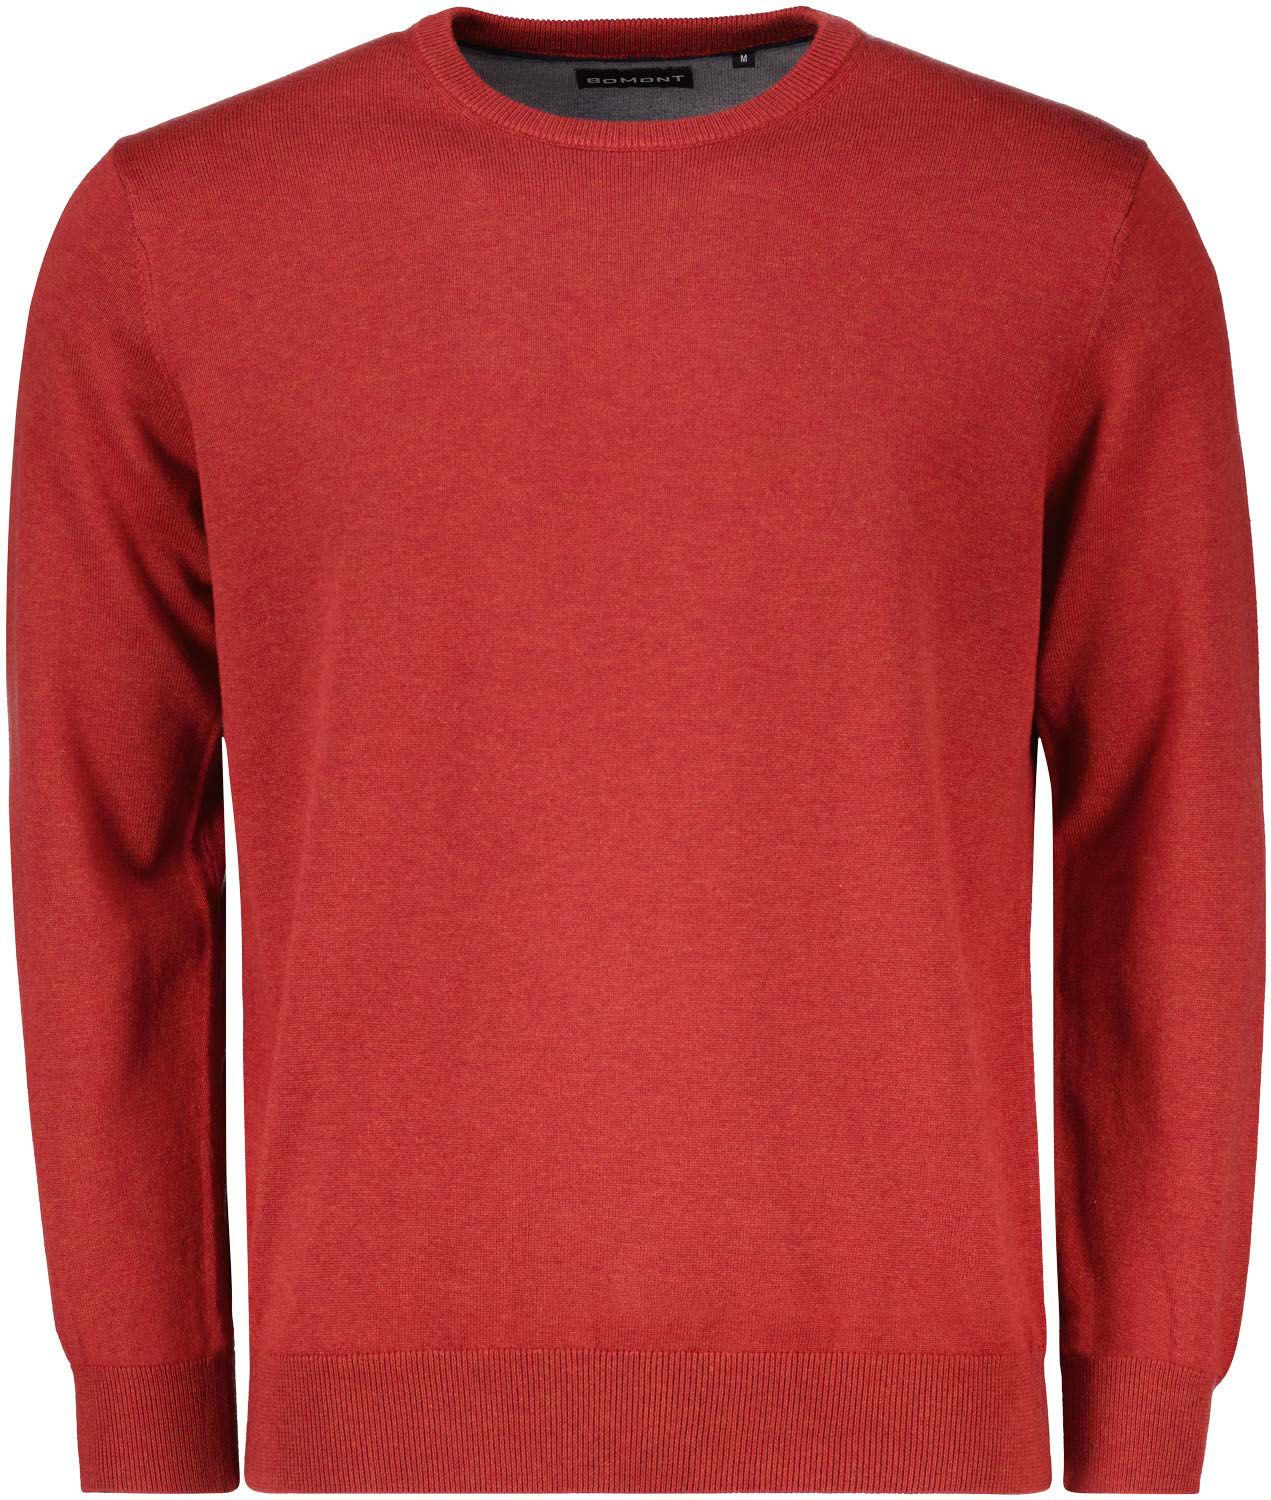 Pullover R-neck  Rood